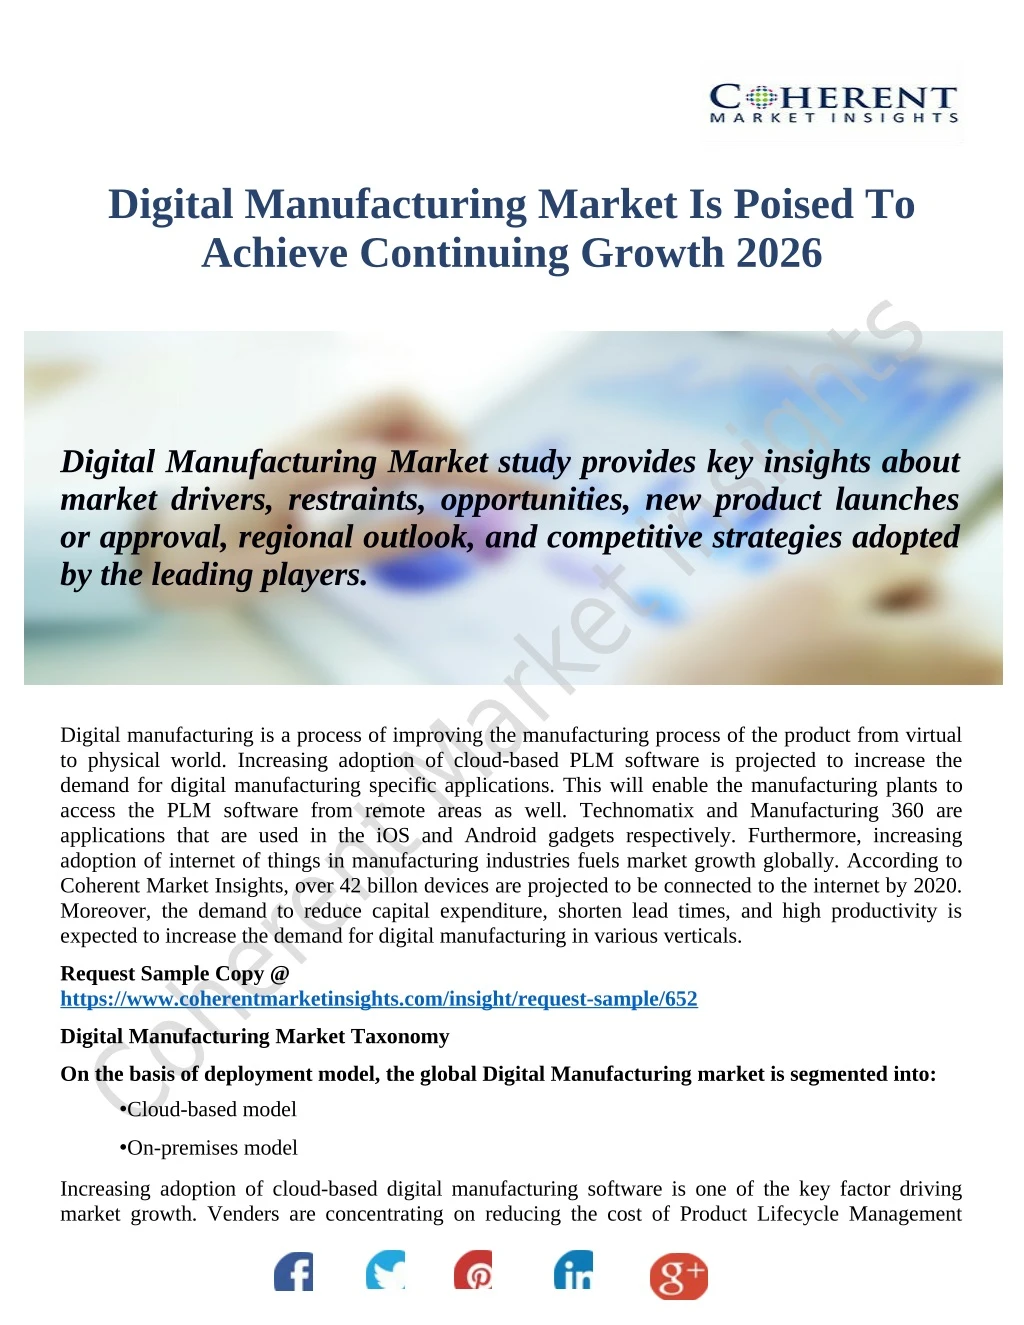 digital manufacturing market is poised to achieve